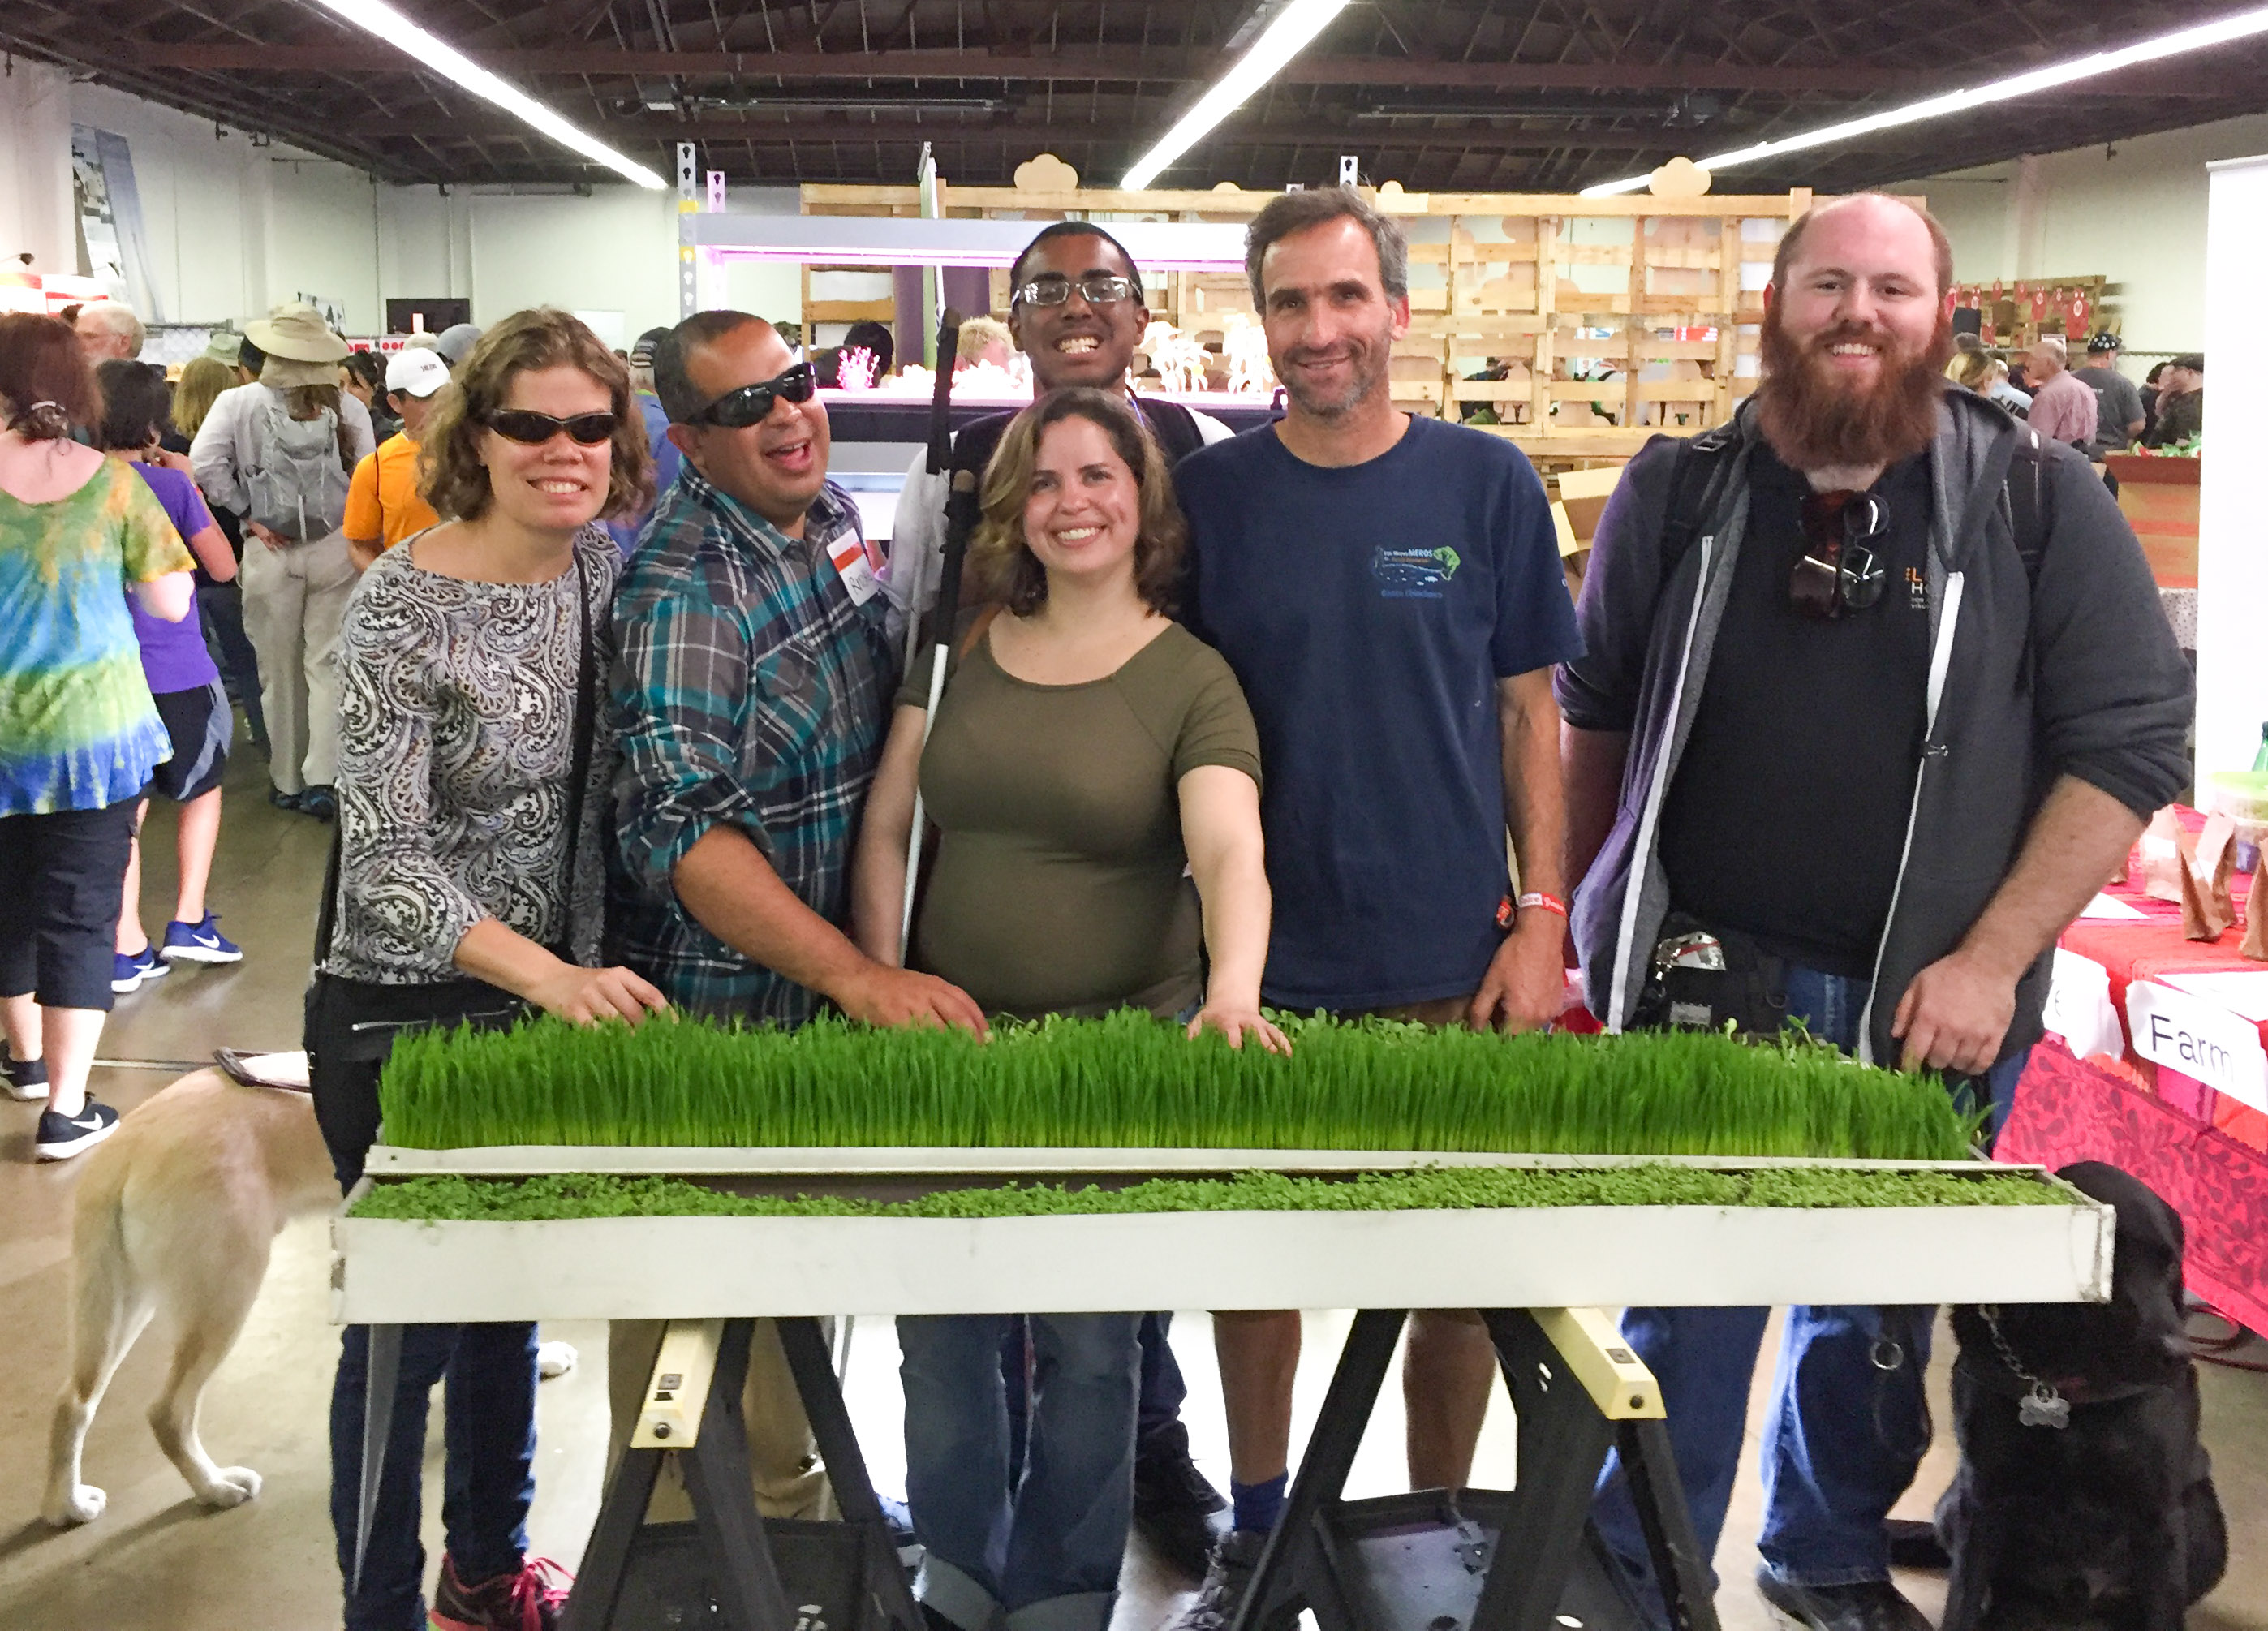 A group of participants and LightHouse Staff including Youth Services Coordinators Richie Flores and Jamey Gump, and Director of Access Technology Erin Lauridsen feel lush blades of grass in a aquaponics display.